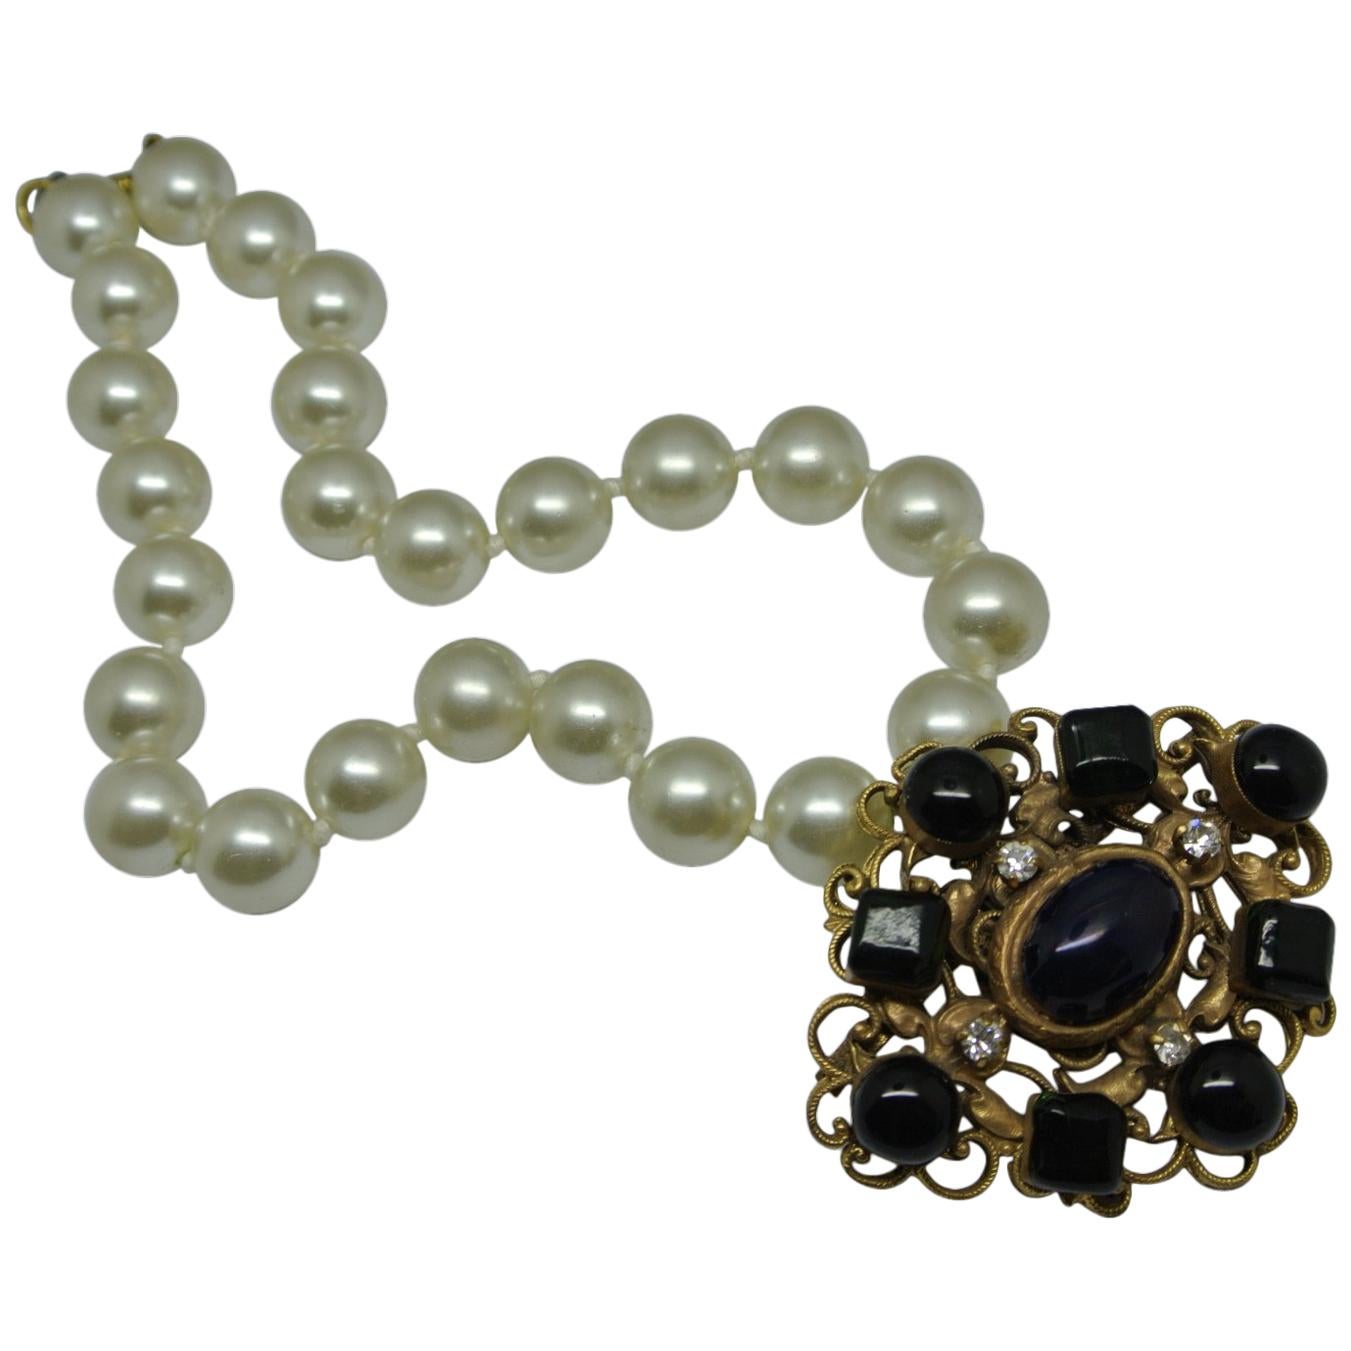 Chanel green gripoix poured glass pearl byzantine filigree pendant necklace For Sale